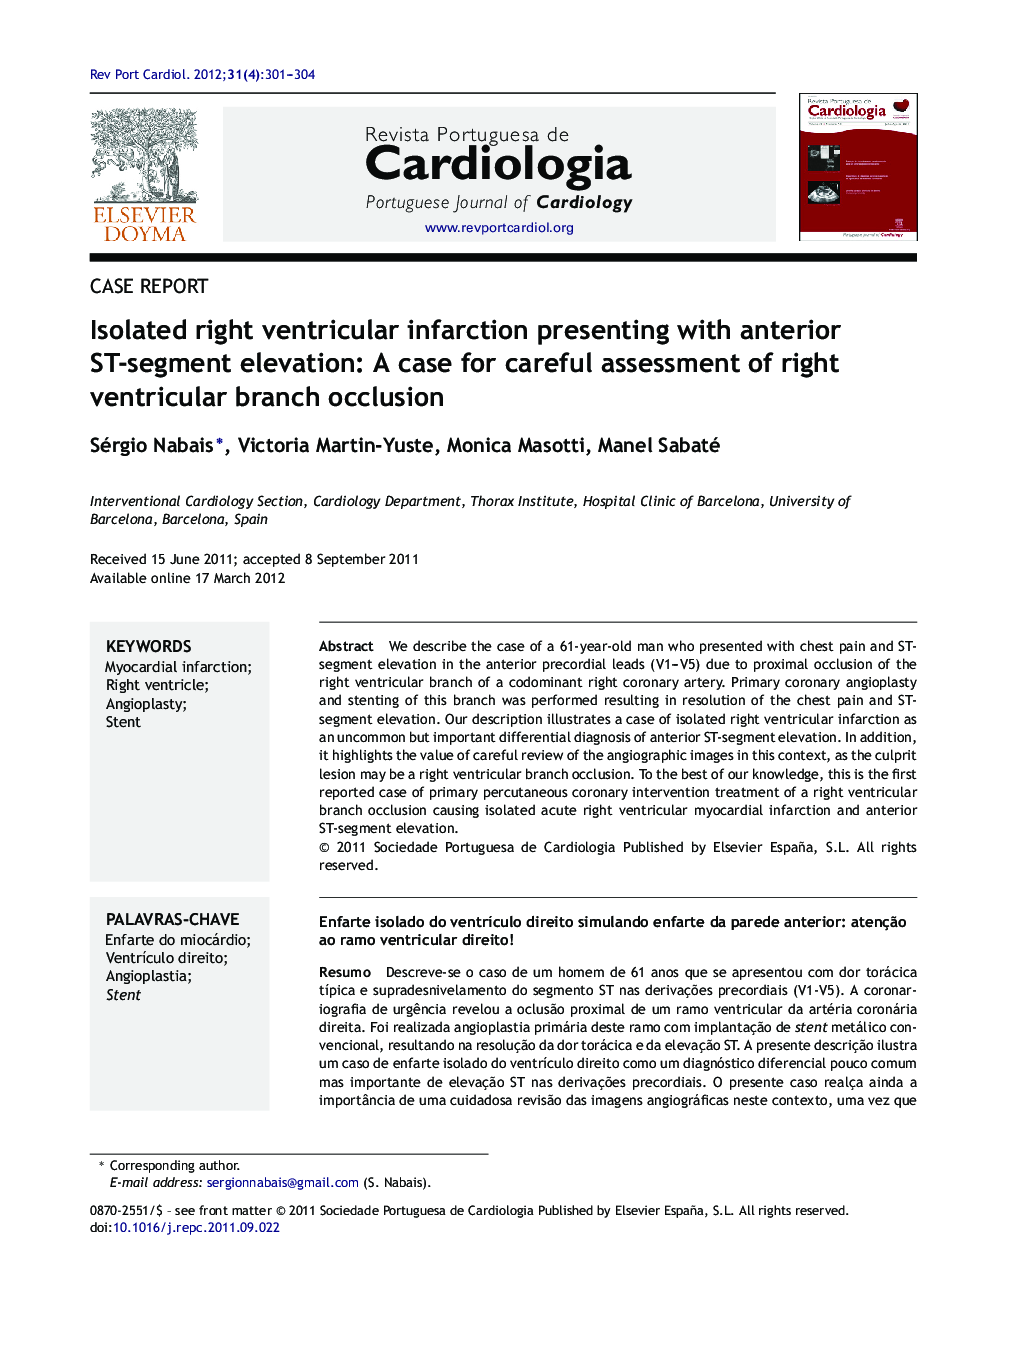 Isolated right ventricular infarction presenting with anterior ST-segment elevation: A case for careful assessment of right ventricular branch occlusion